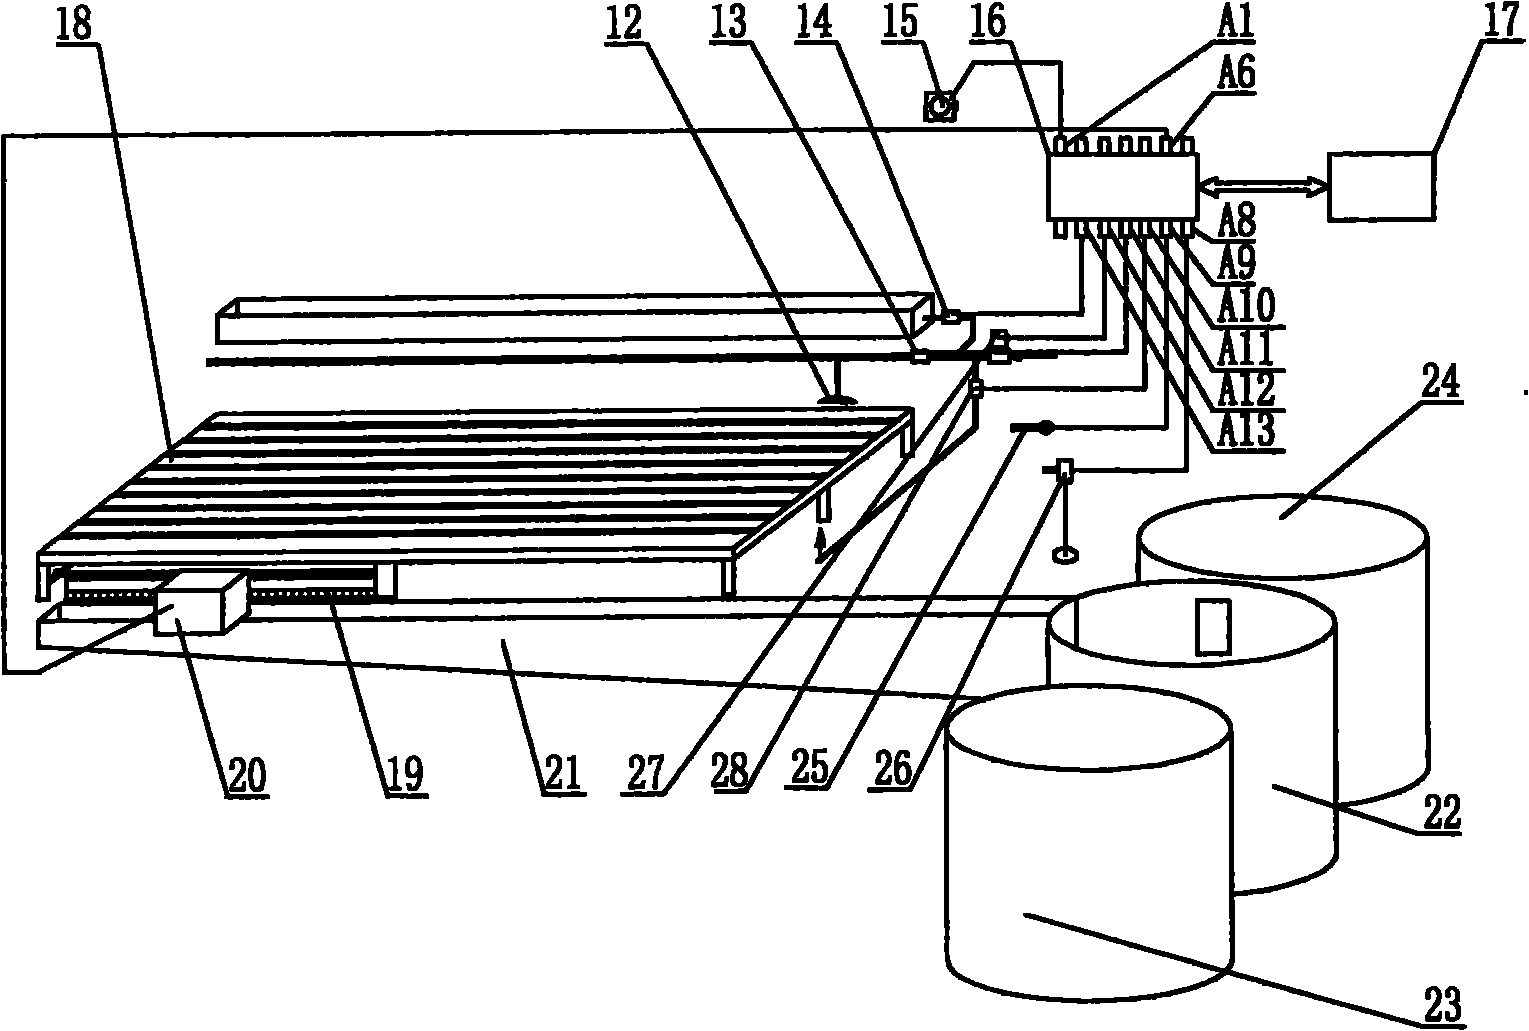 Device for automatically feeding and clearing dung for confined cattle